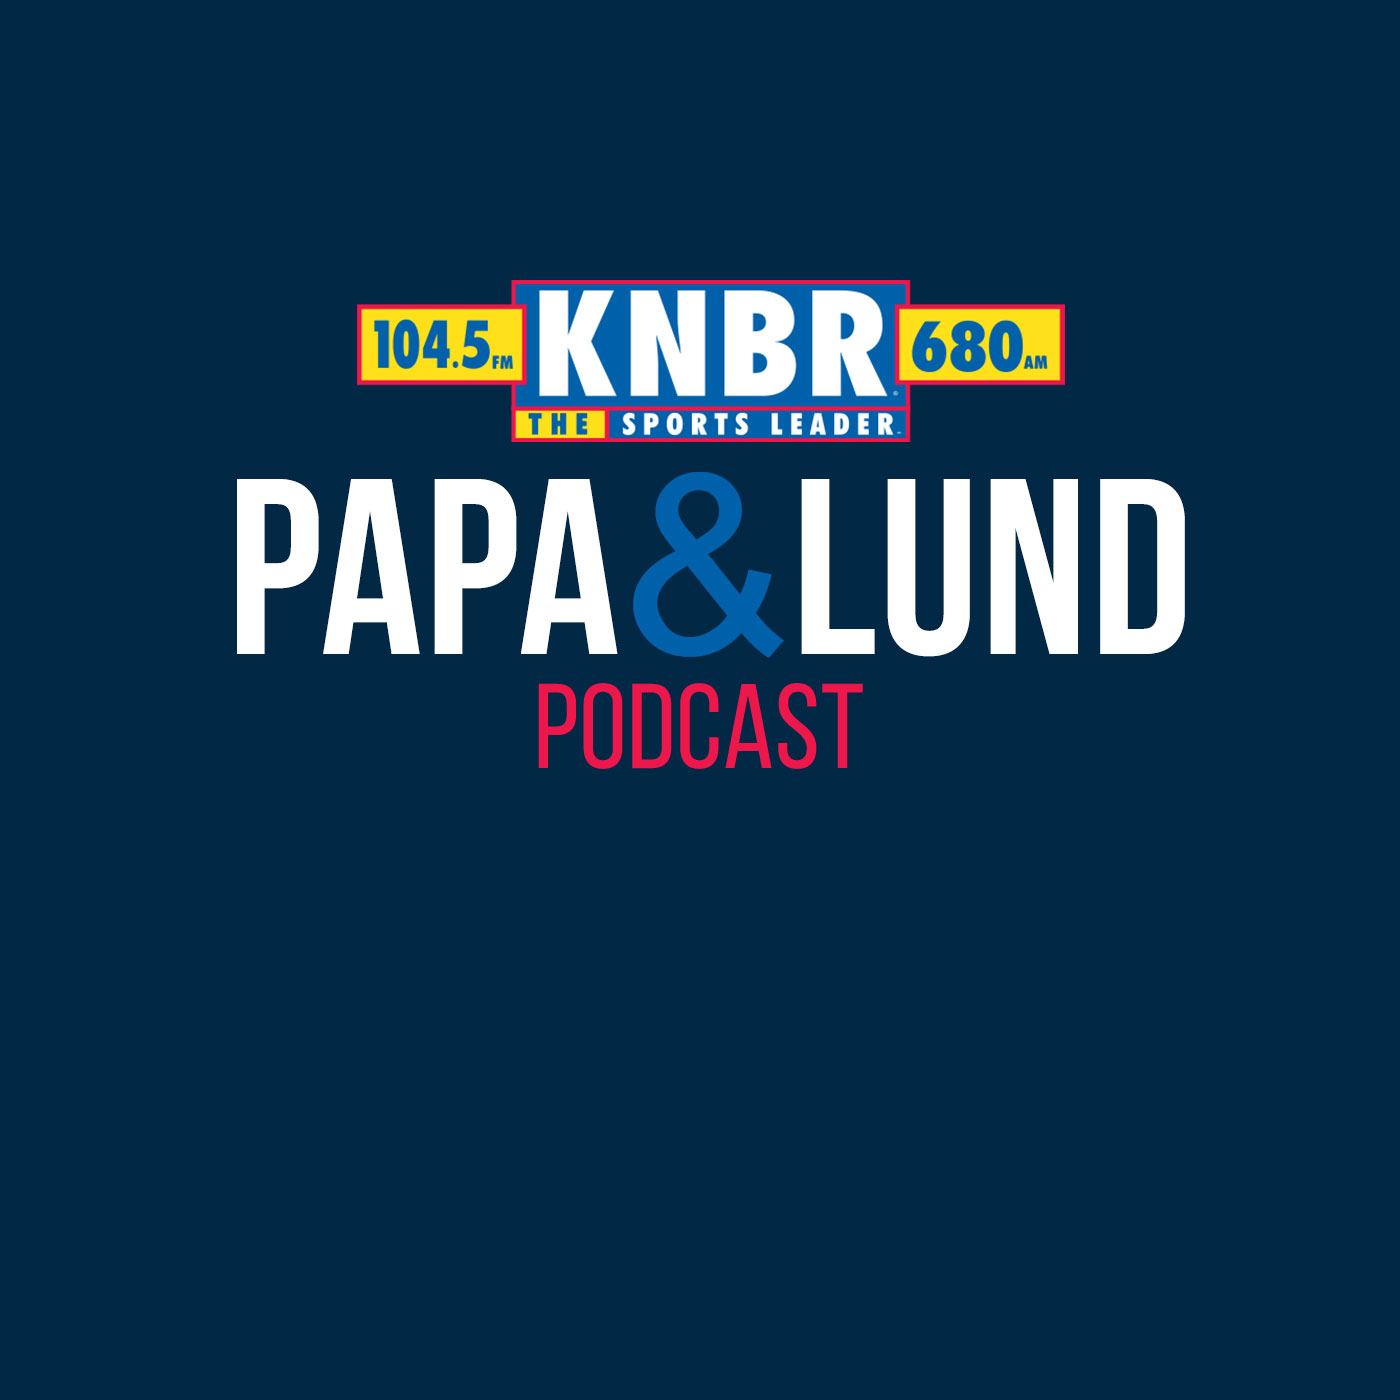 6-21 Bob Melvin joins Papa & Lund to discuss the challenge facing a red hot Giants team, the Padres early season struggles as well as Juan Soto's struggles with his pants